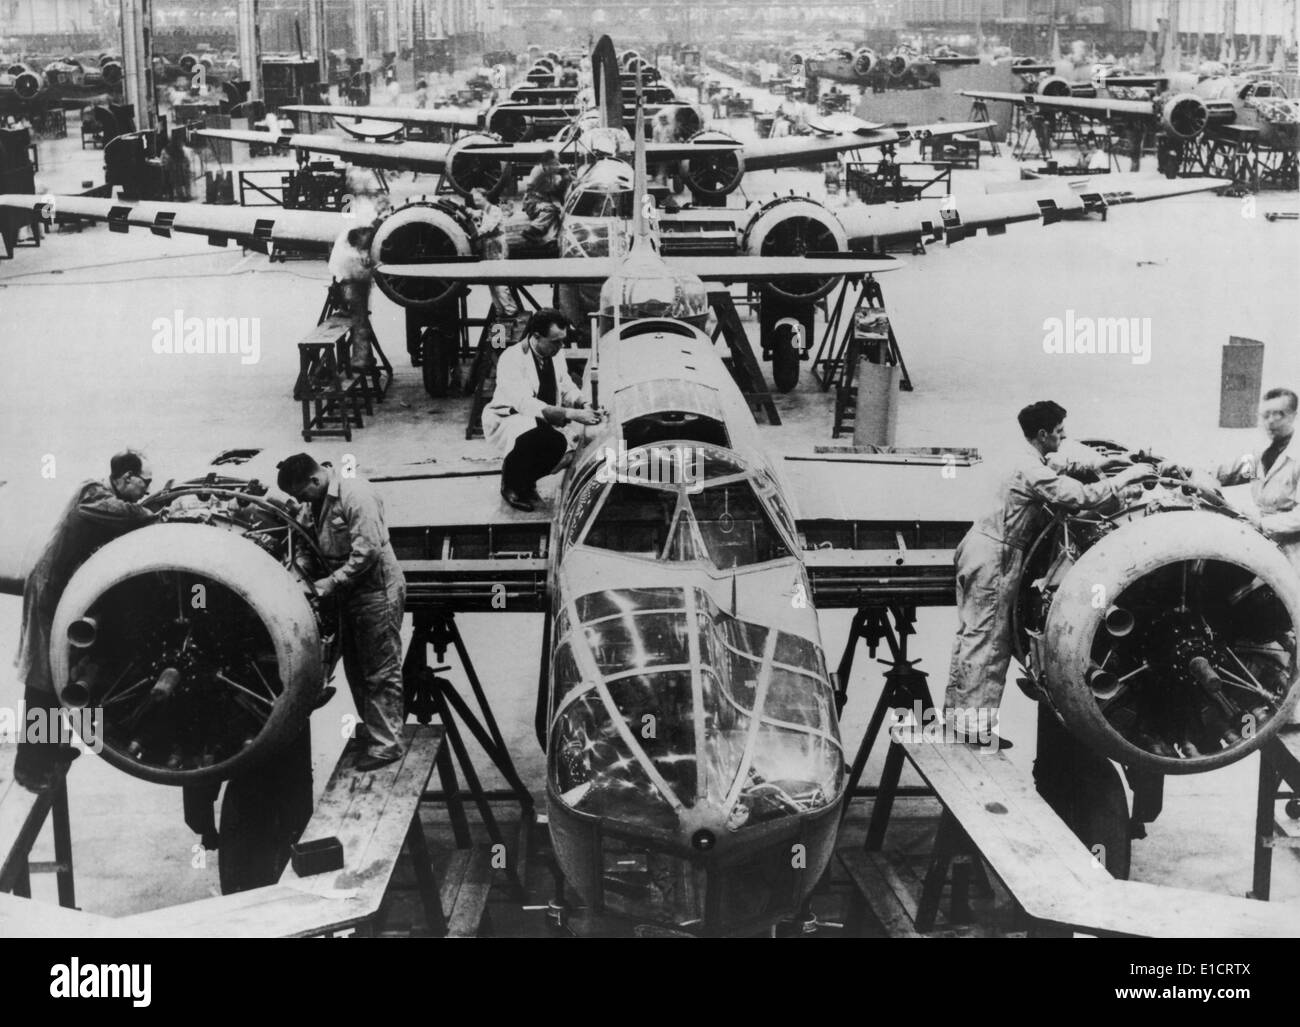 Great Britain manufacturing Blenheim bombers at the beginning of World War 2. This factory is in an undisclosed location in Stock Photo